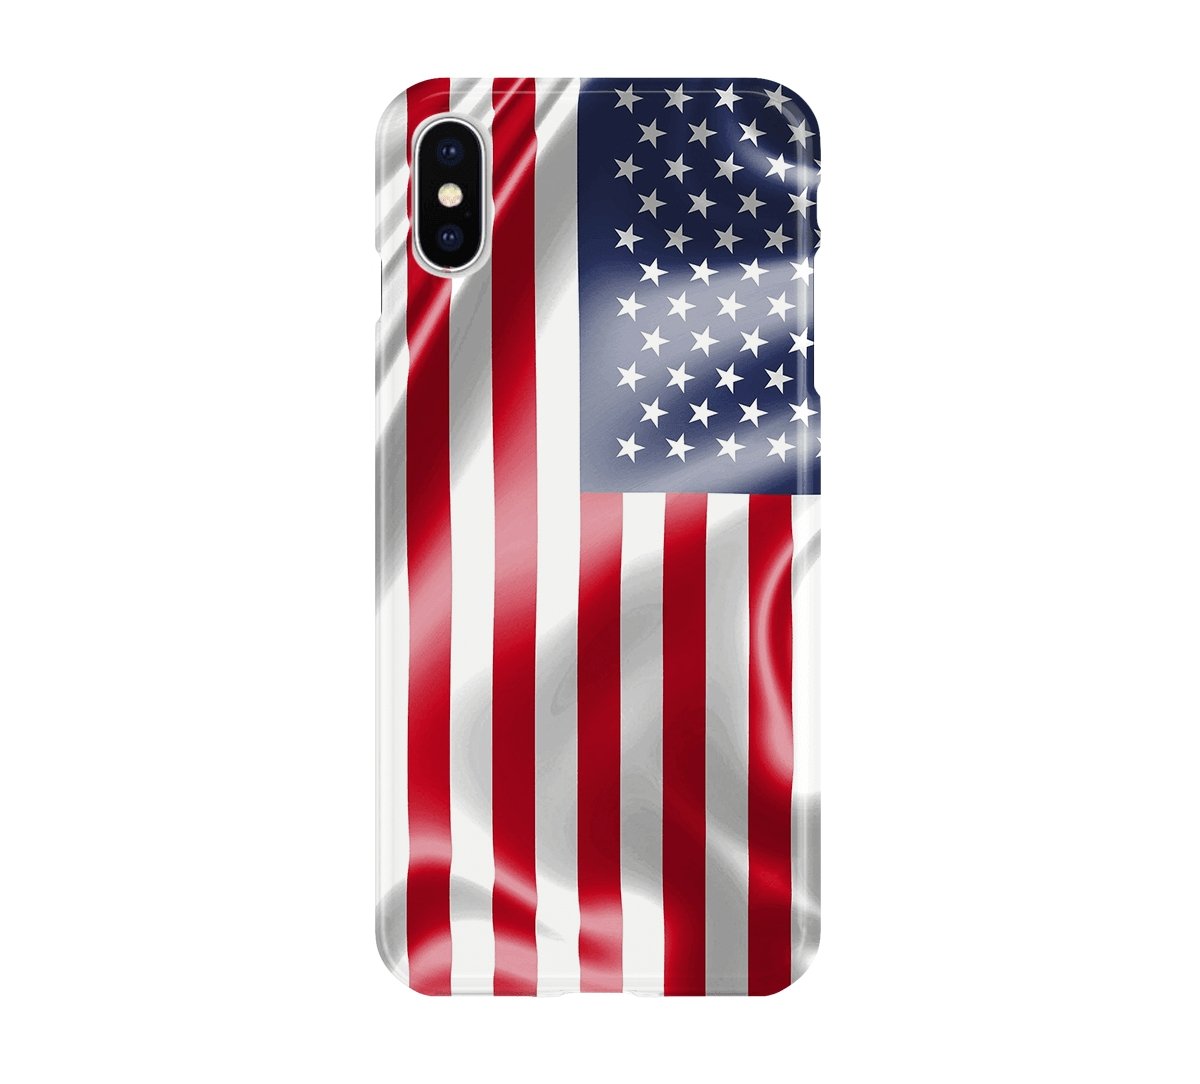 Waving American Flag - iPhone phone case designs by CaseSwagger